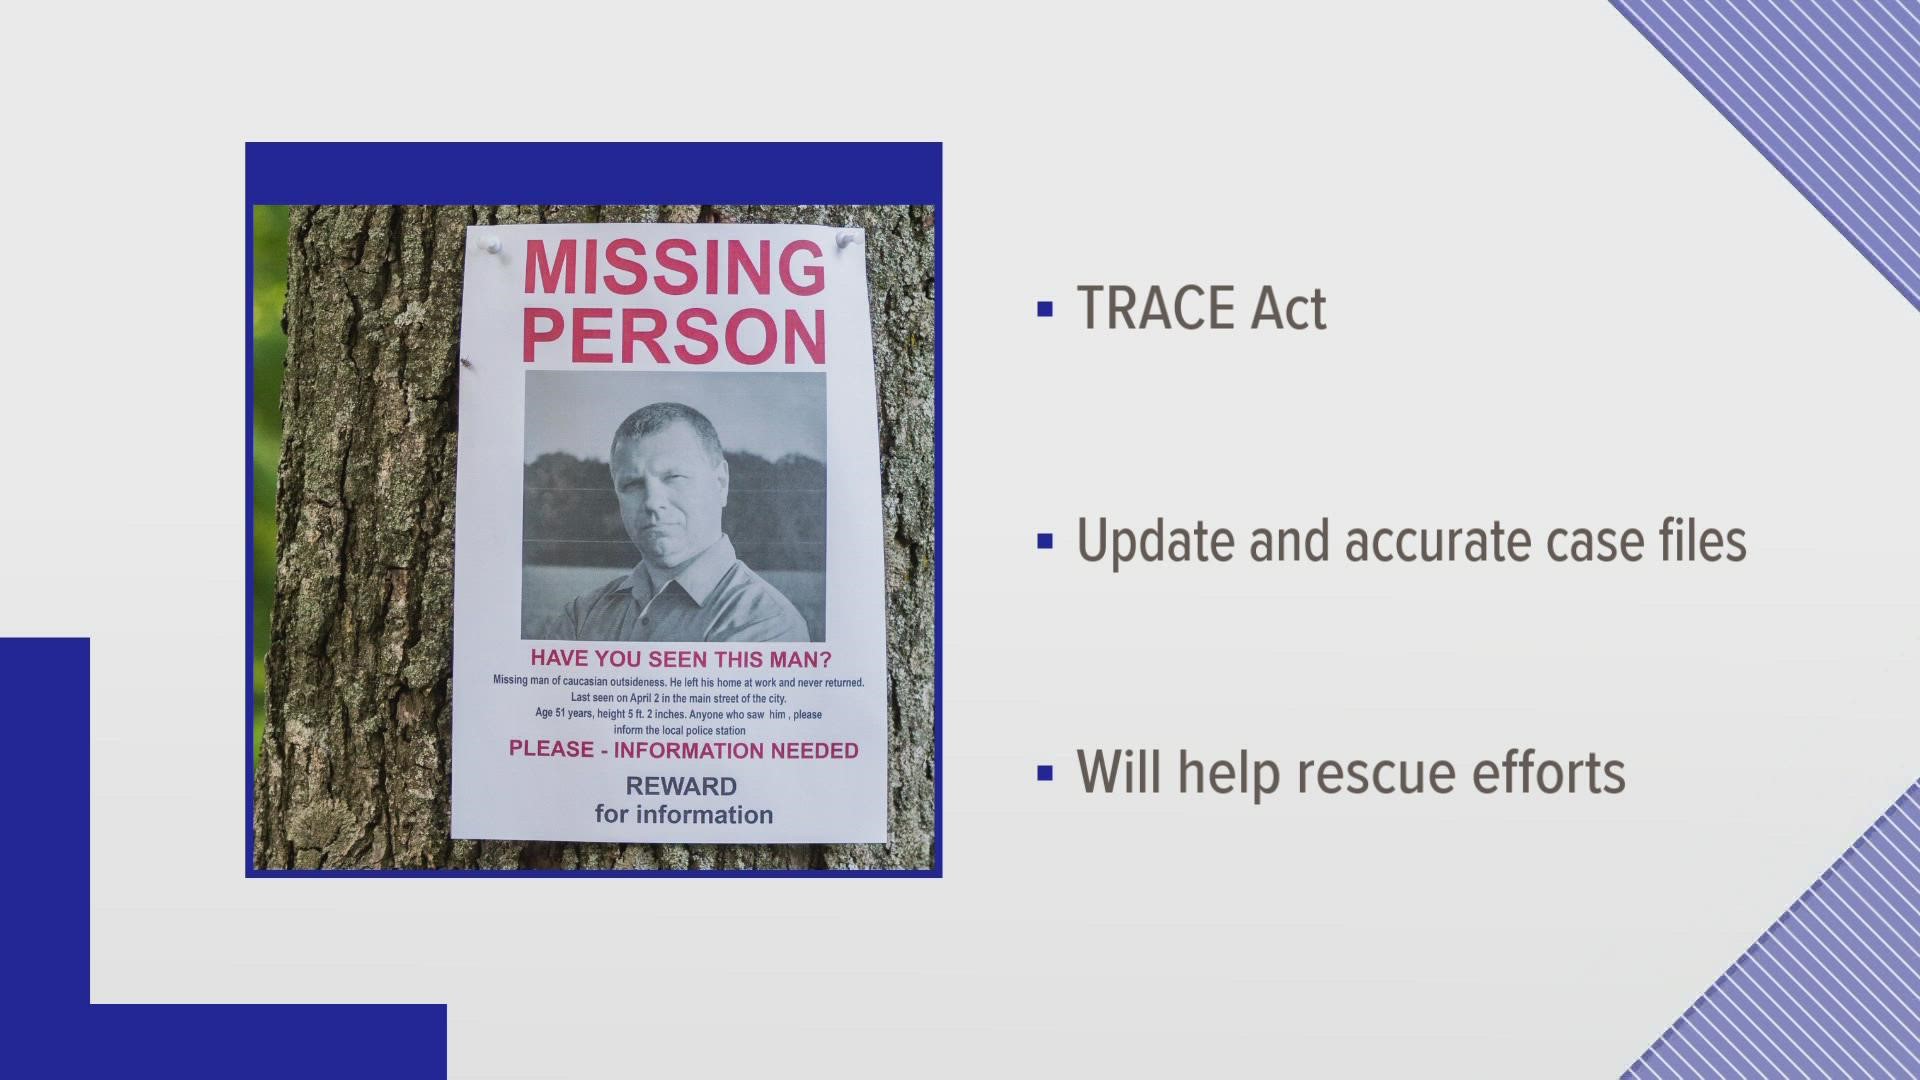 Representative Tim Burchett said the TRACE Act is meant to bolster rescue efforts and help officers arrest suspects involved in missing person cases.